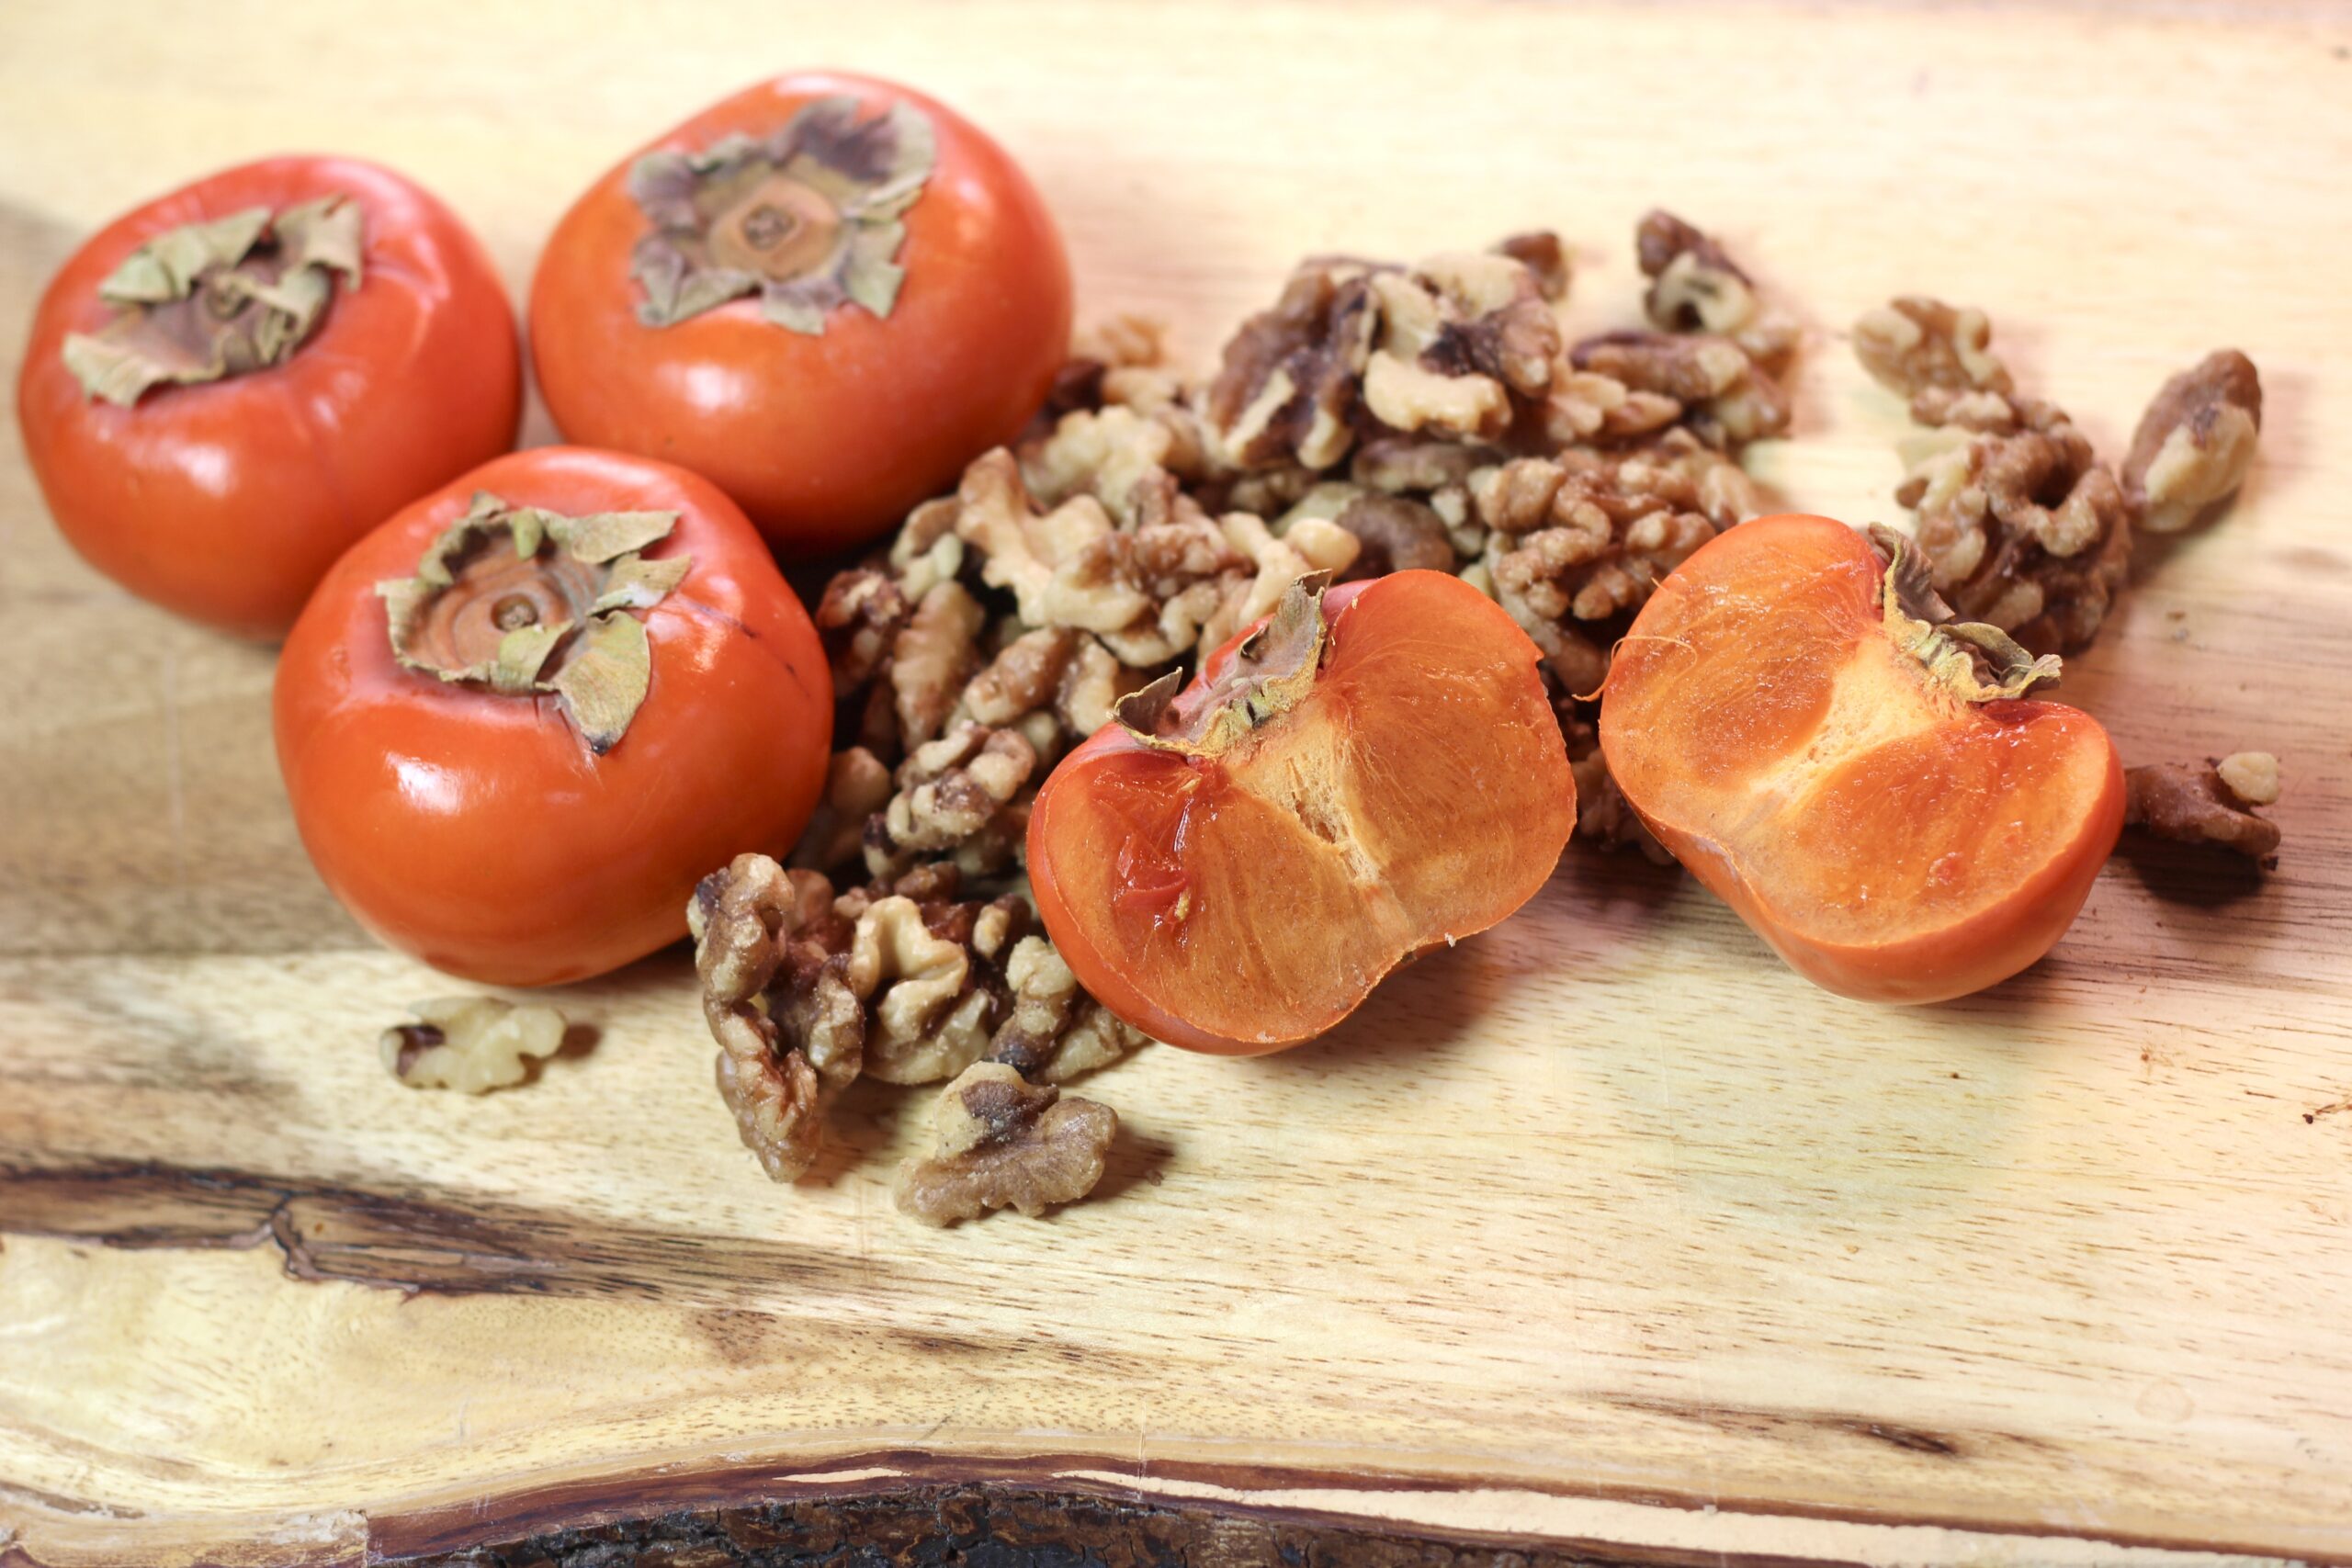 Persimmons and Walnuts